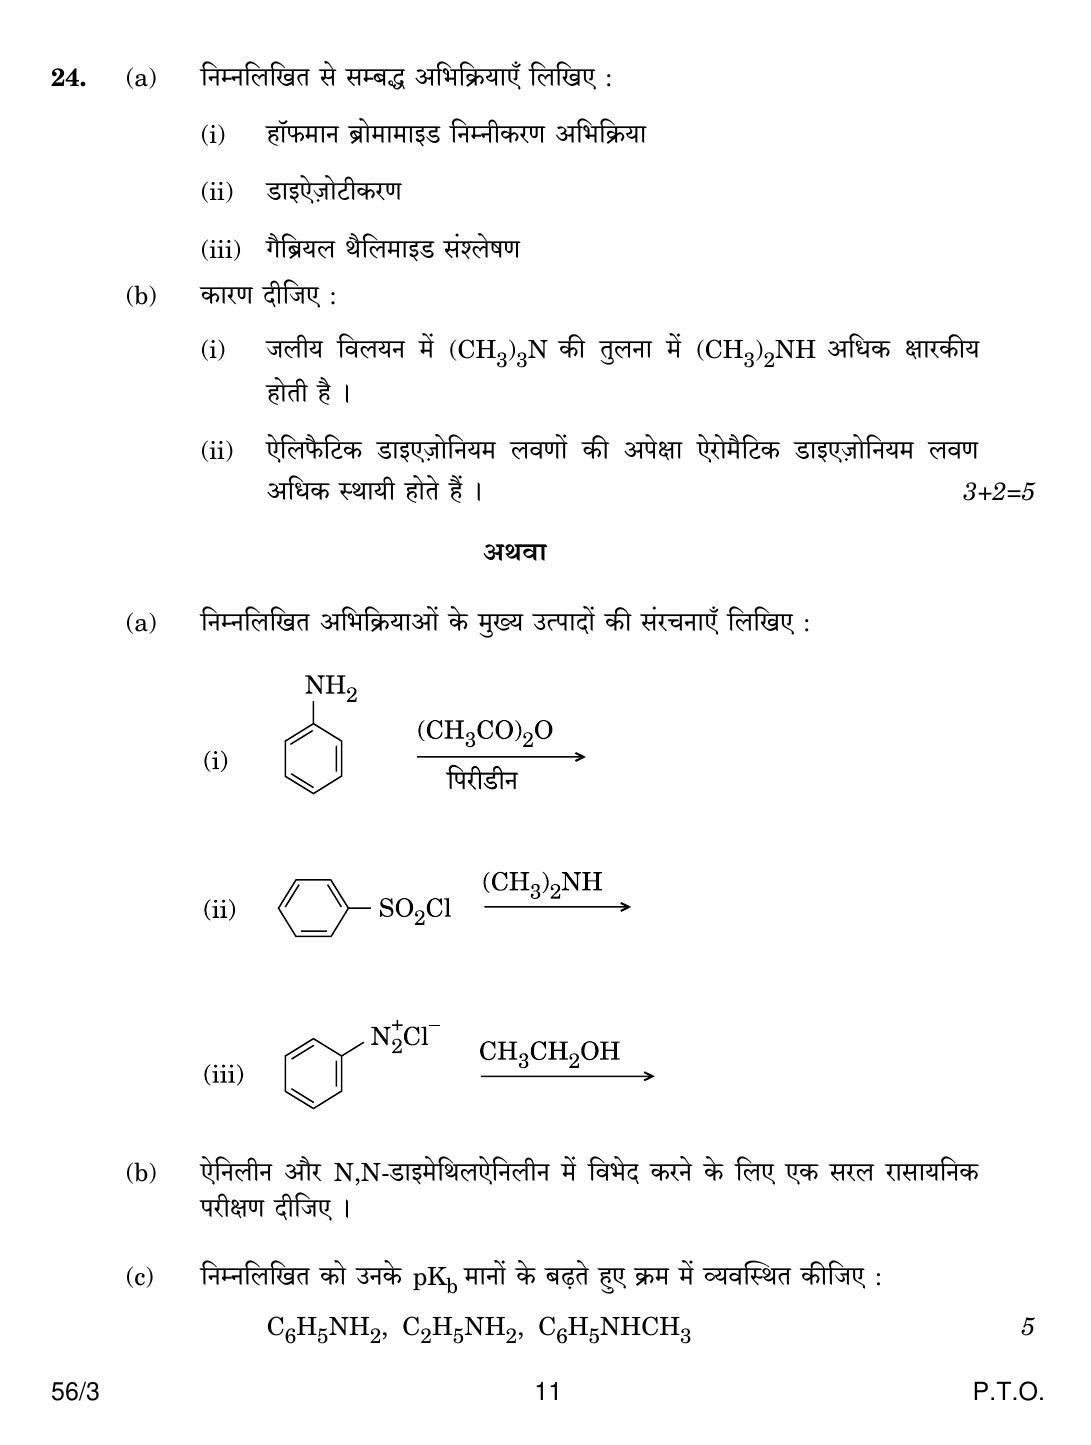 CBSE Class 12 56-3 CHEMISTRY 2018 Question Paper - Page 11